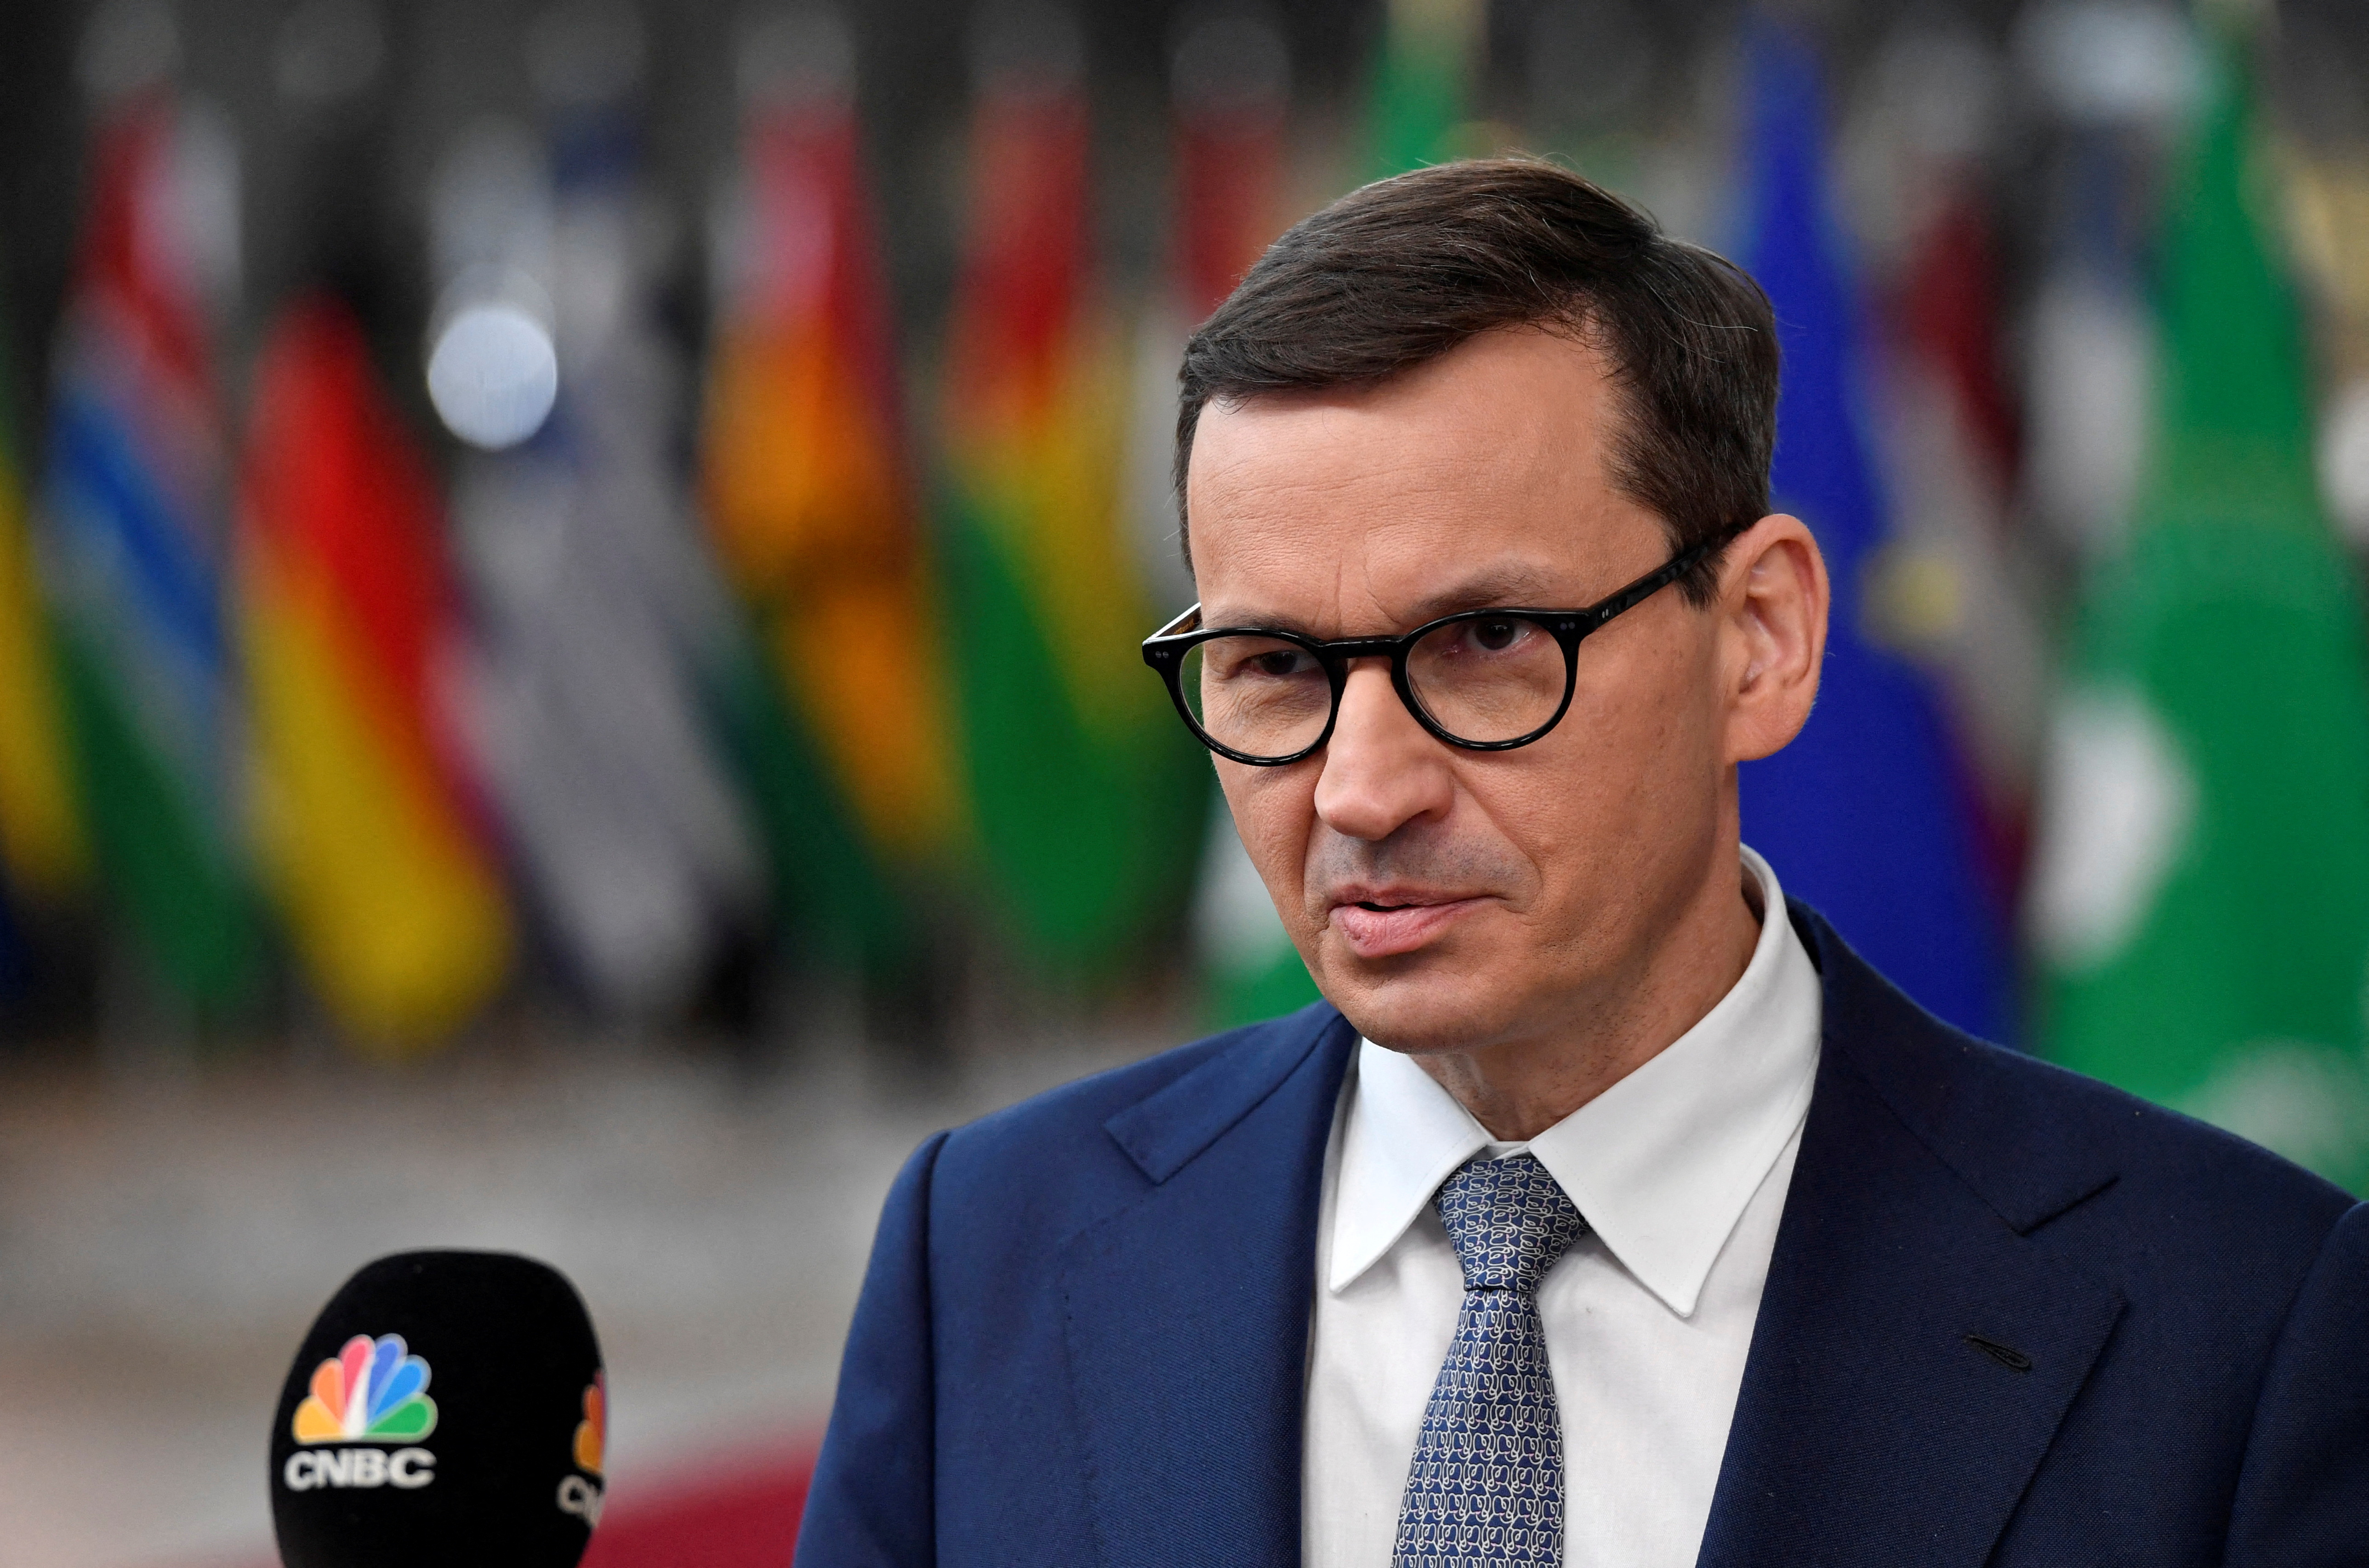 Poland’s Prime Minister Mateusz Morawiecki speaks with the media as he arrives for the EU-Africa summit at the European Council building in Brussels, Belgium February 17, 2022